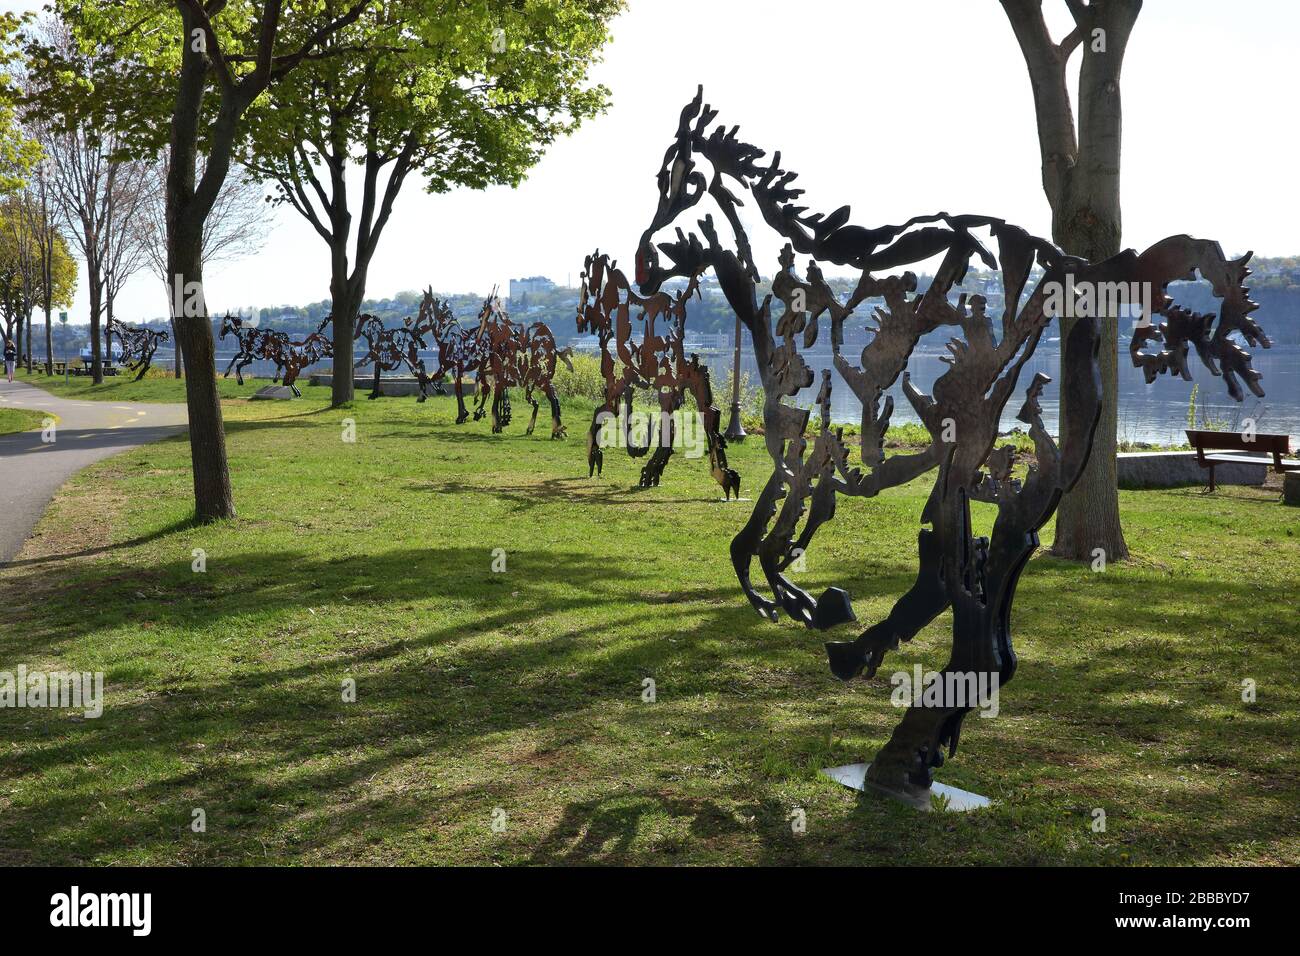 Eight life-size steel plate horses by sculptor Joe Fafard, entitled 'Do Re Mi Fa Sol La Si Do'', each with cutouts depicting scenes and figures from Quebec's past. Notre-Dame-de-la-Garde Park, Champlain Blvd, Quebec City, Quebec, Canada Stock Photo